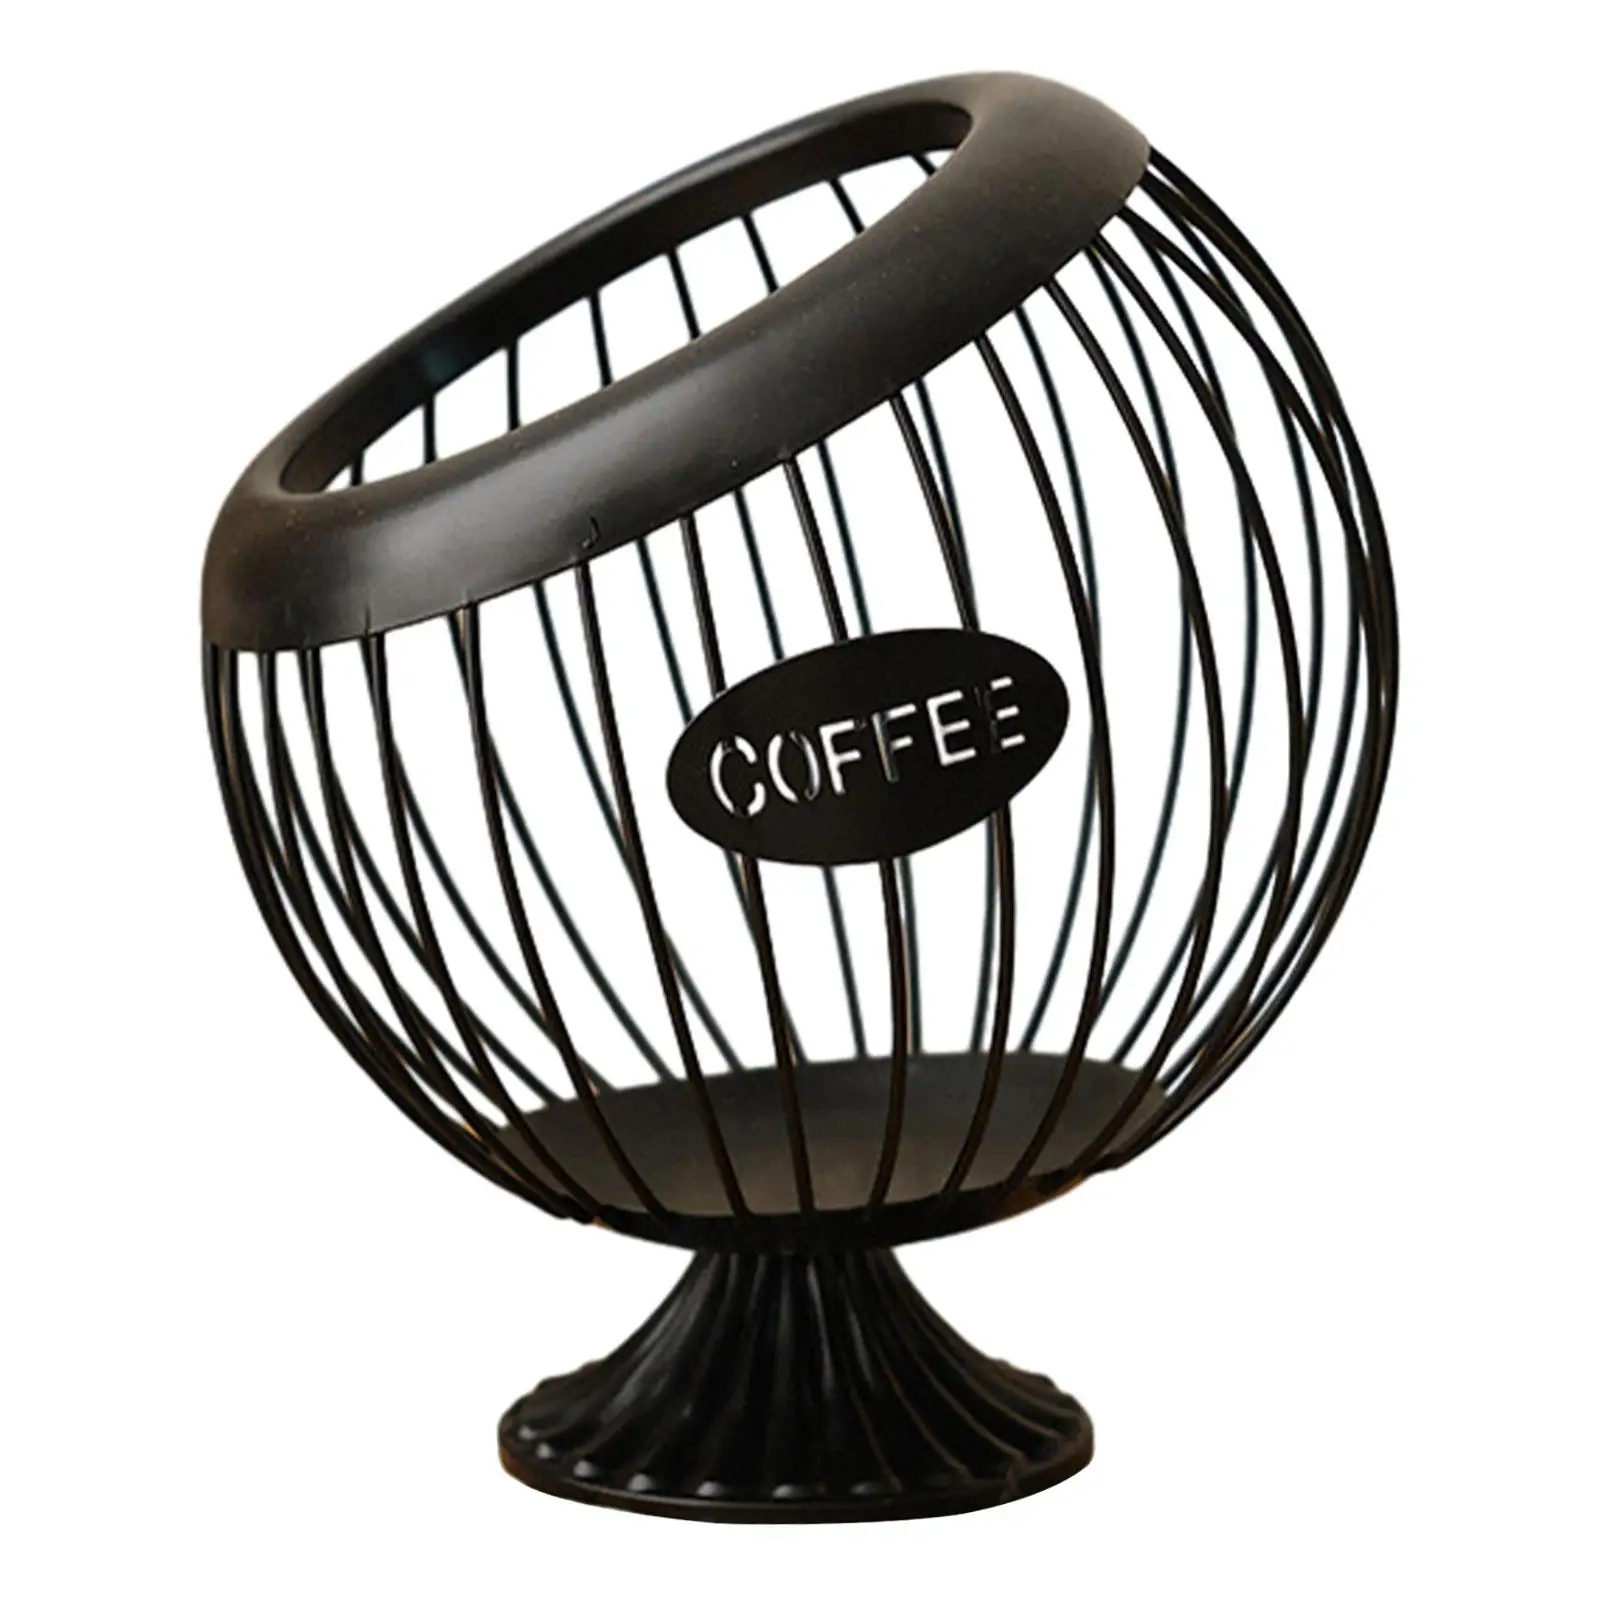 Coffee Pod Storage Basket Coffee Capsule Cages for Hotel Cafe Bar Countertop